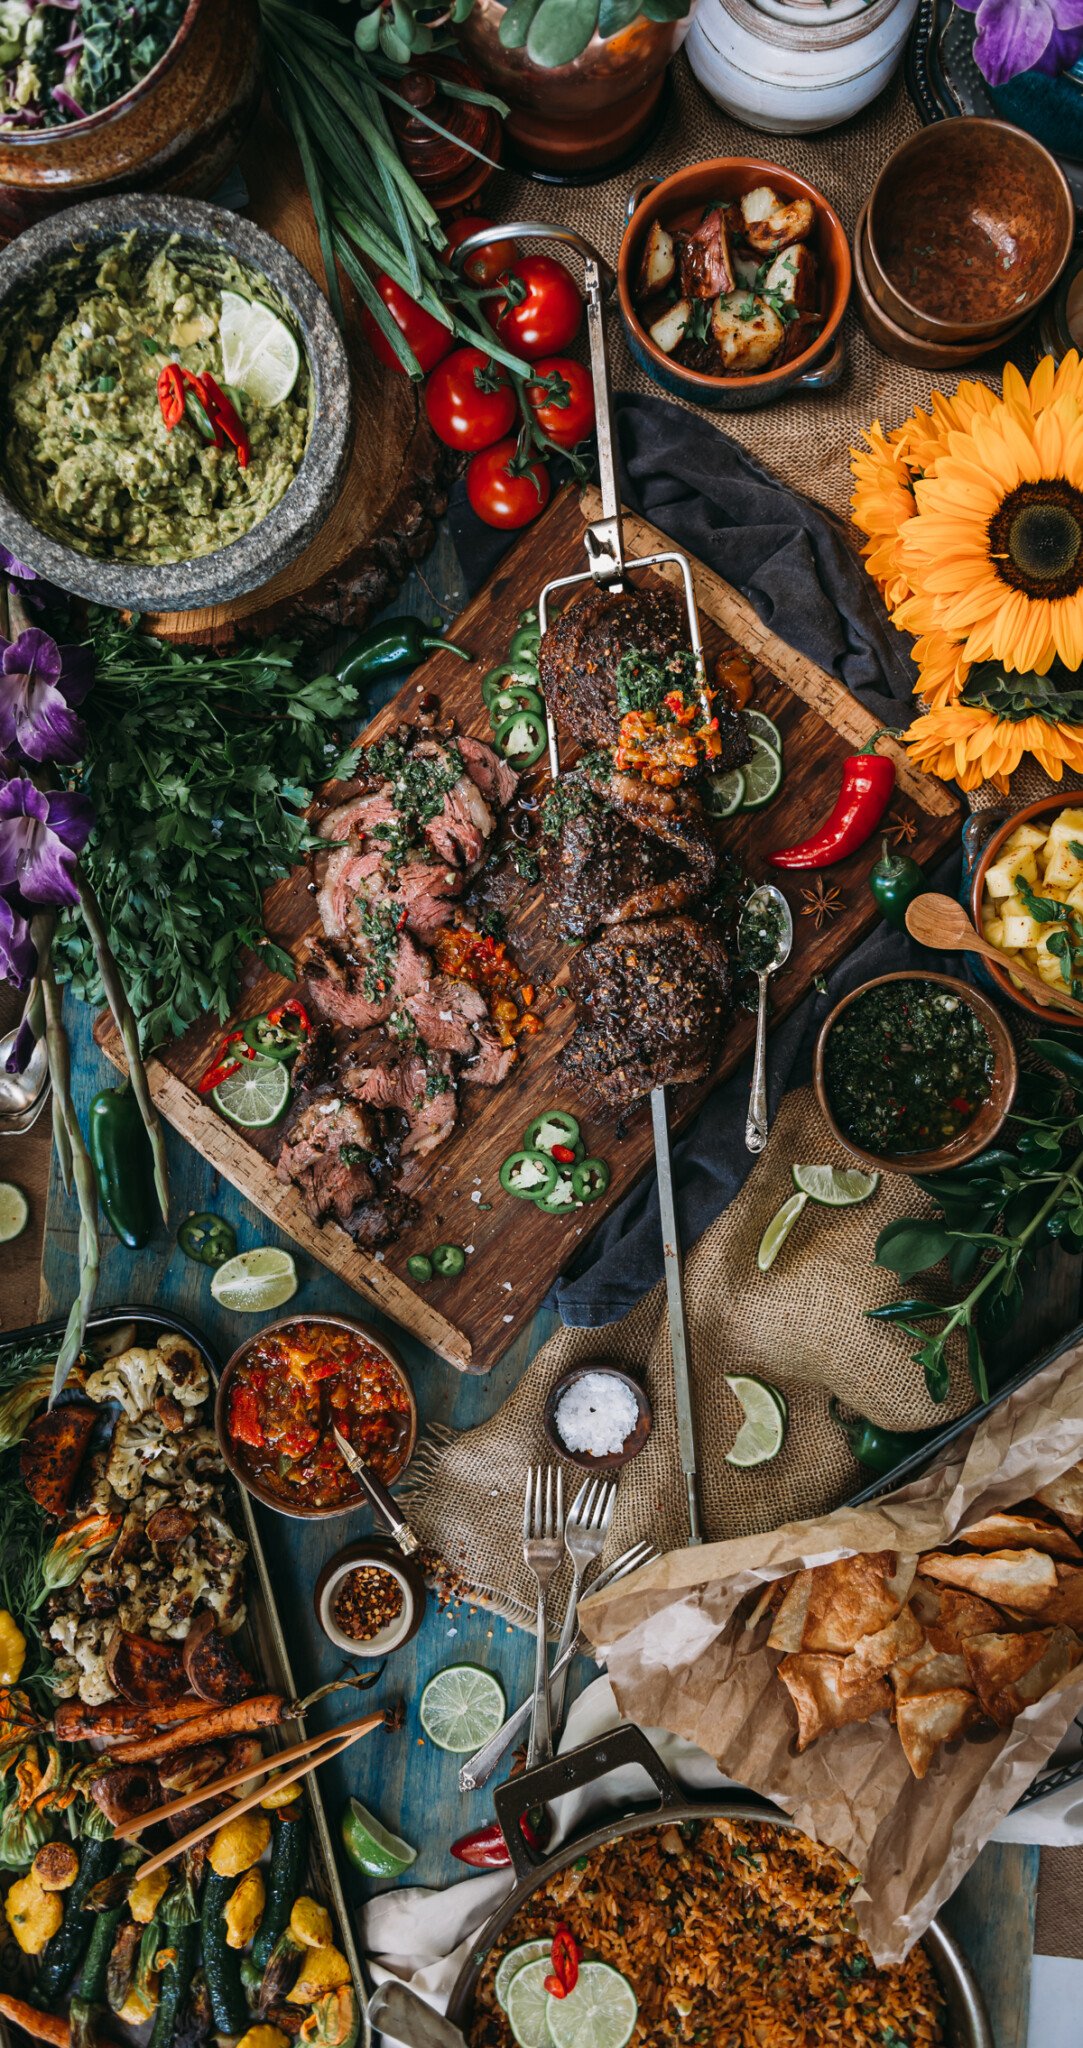 Huge spread of food centered around a rotisserie beef picanha with side dishes, flowers and various sauces.